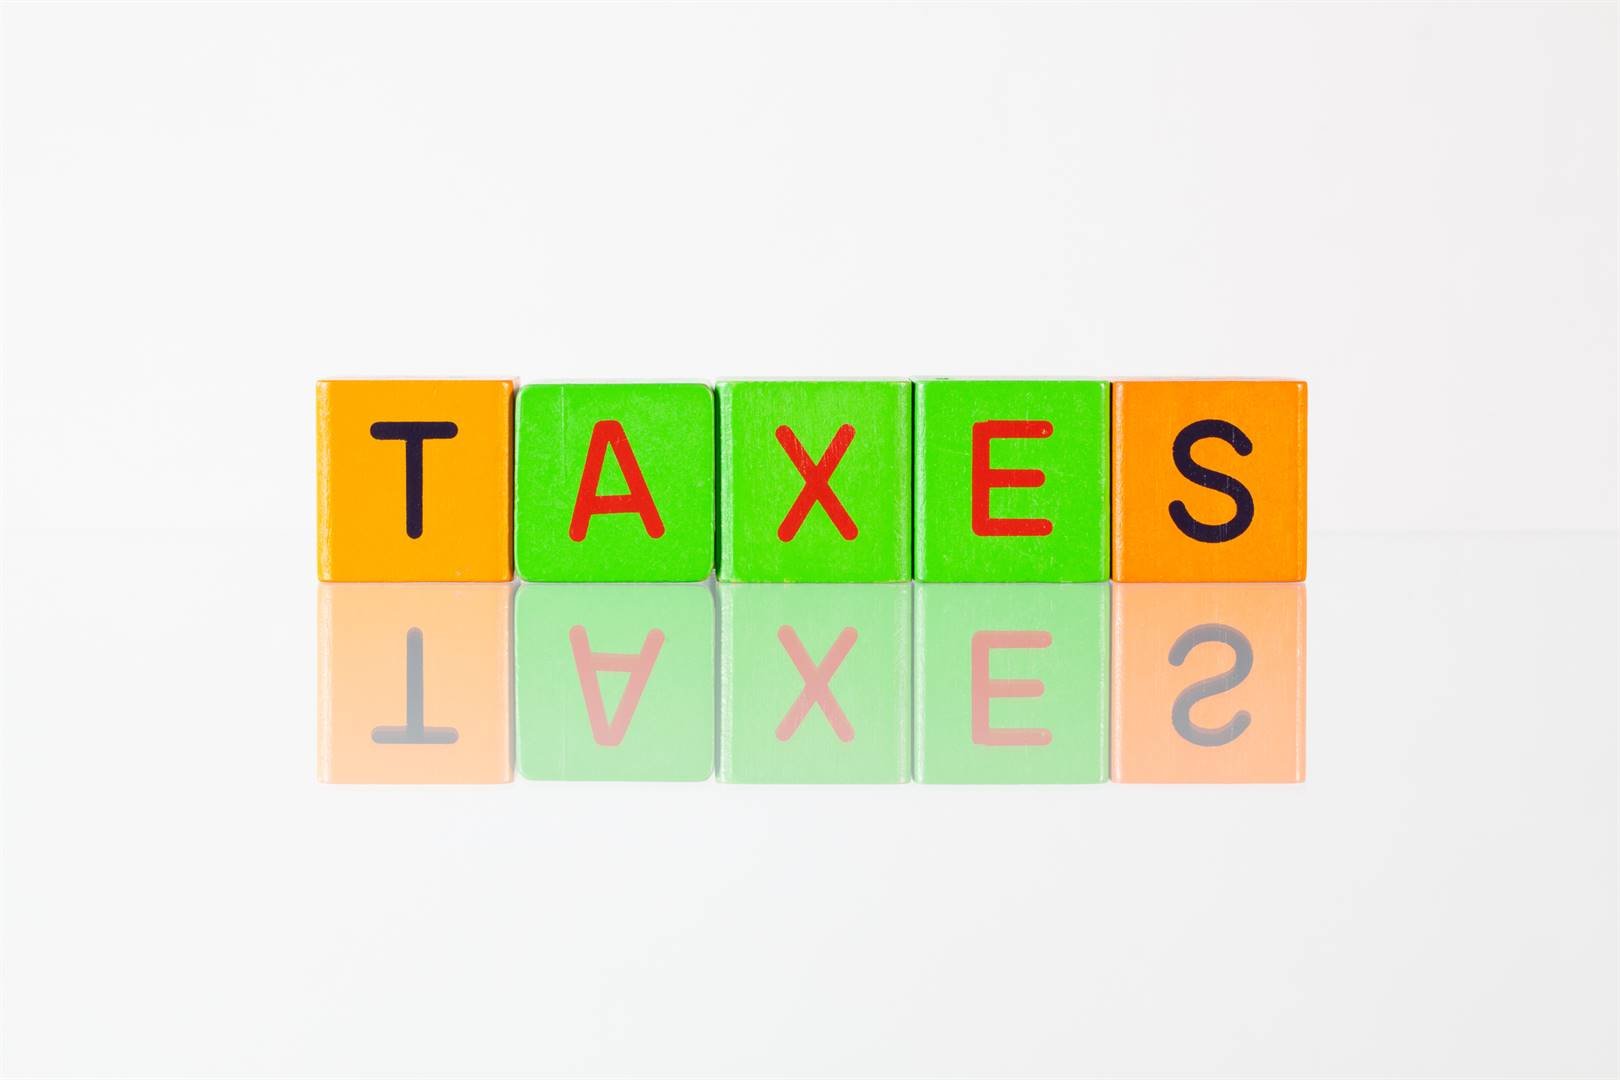 A common misconception has arisen that, where taxes in respect of that property were paid in that foreign jurisdiction, the revenue earned from that property was either exempt in South Africa or did not need to be disclosed for tax or exchange control purposes